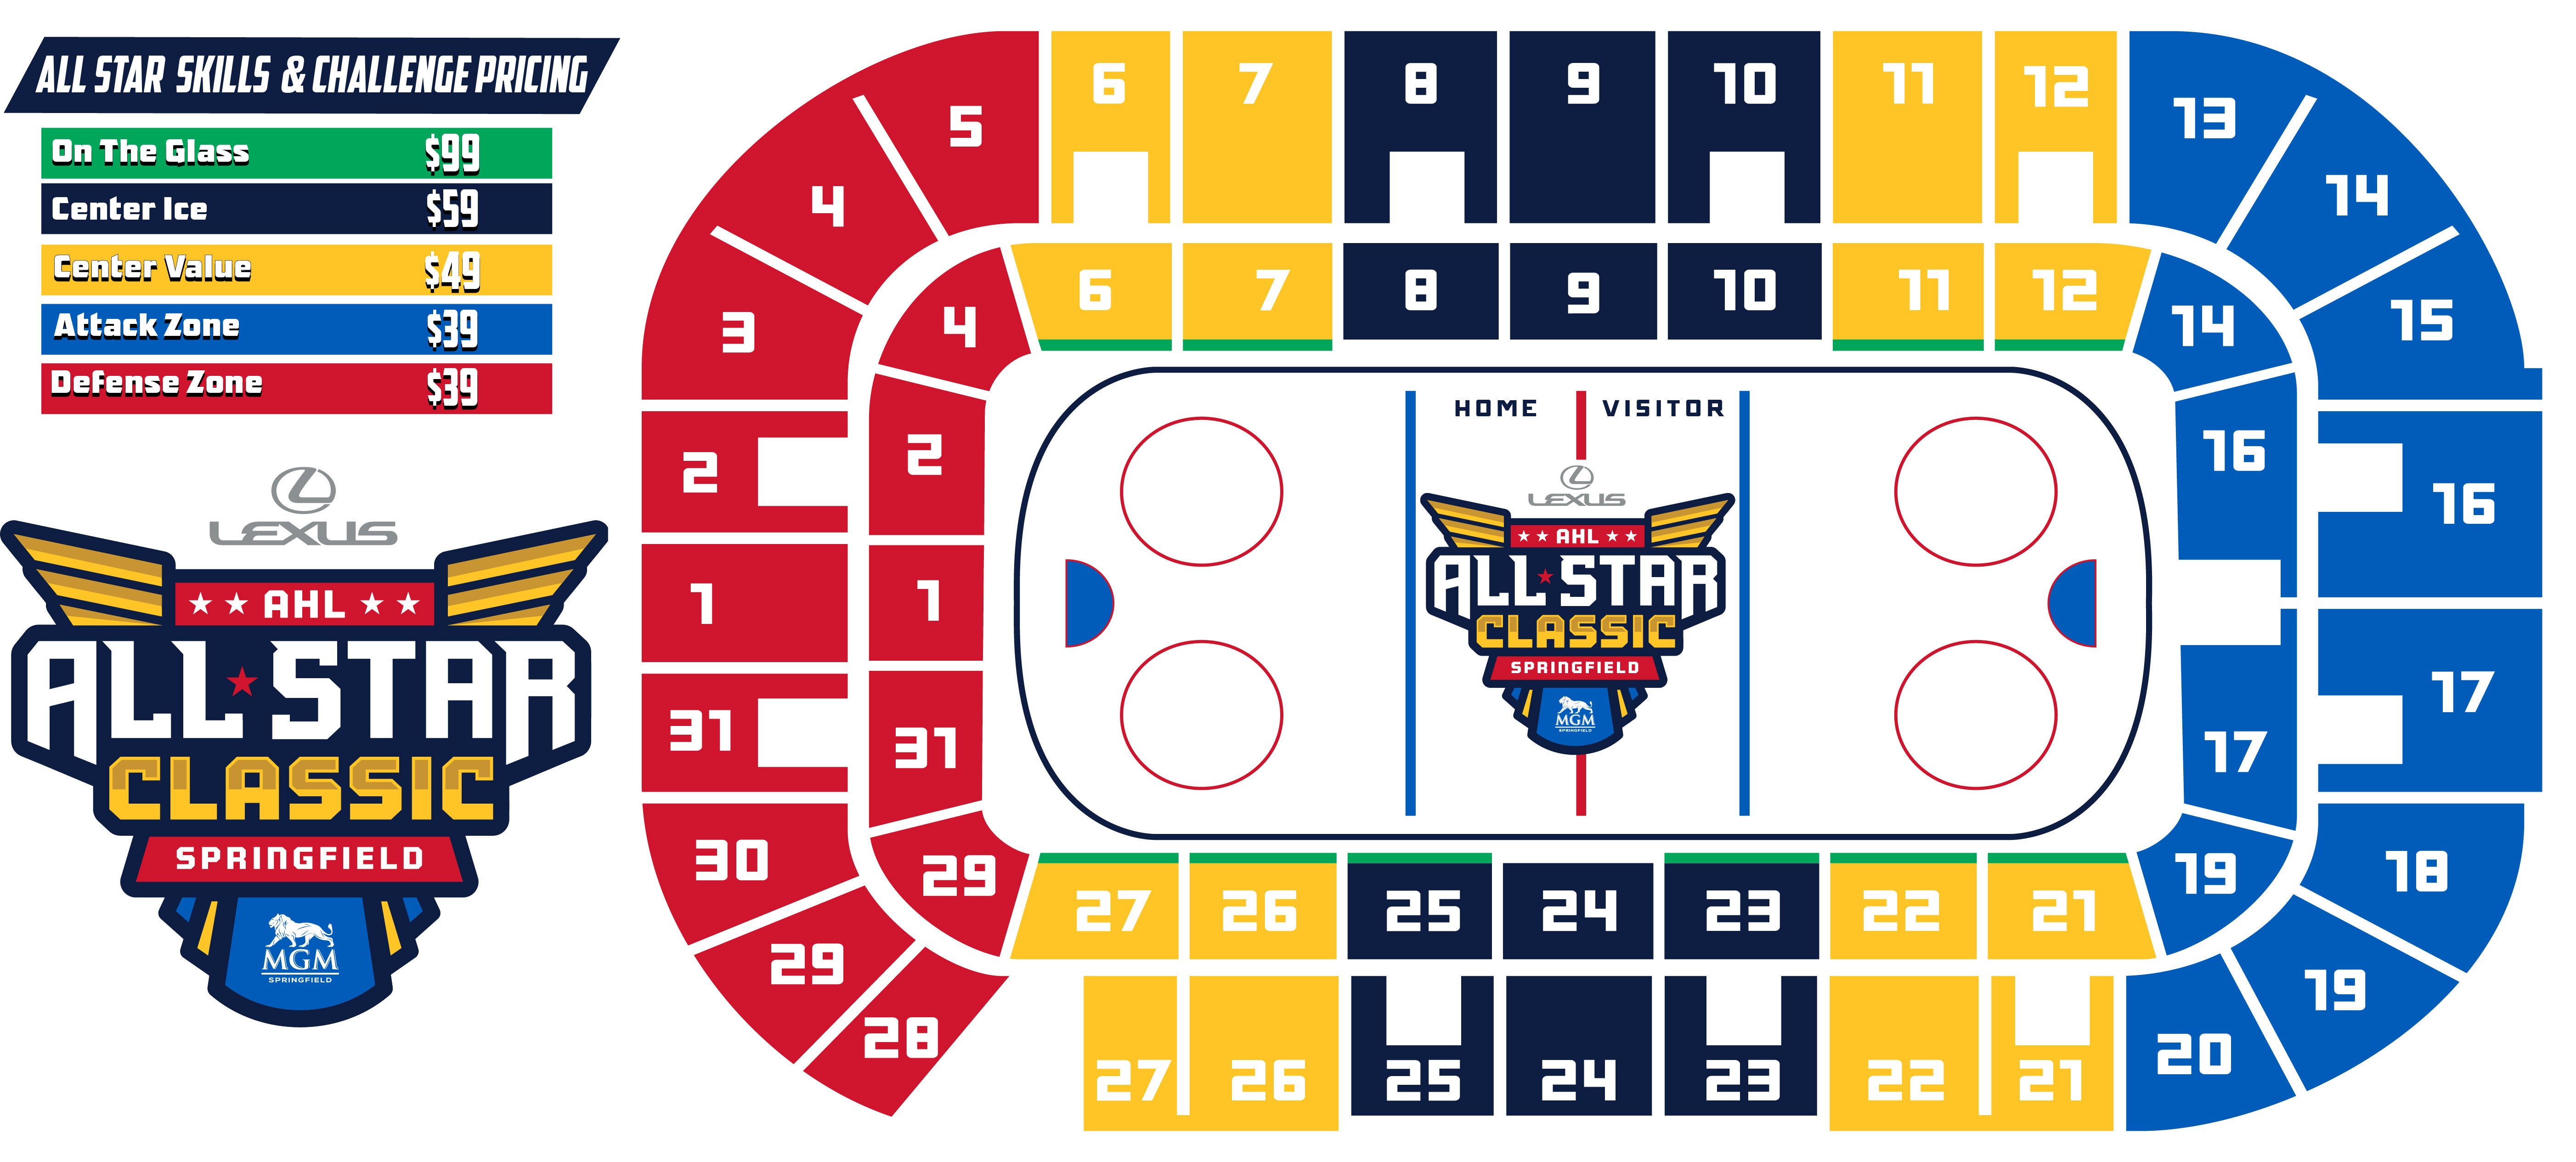 All Star Seating chart WITH PRICING (1).jpg